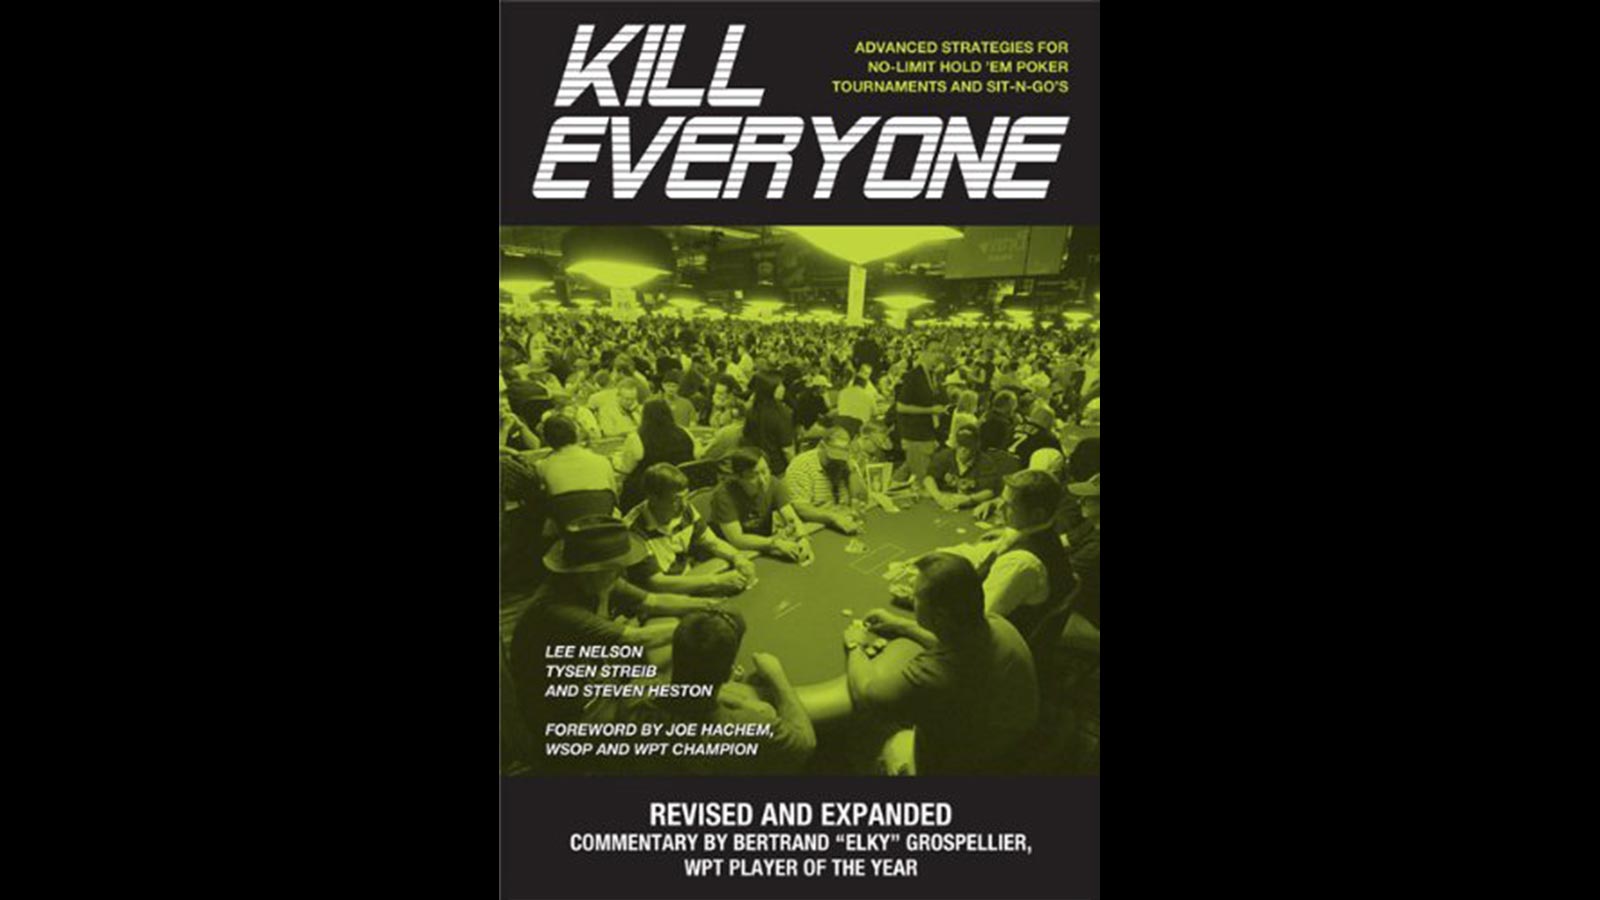 Kill Everyone Advanced Strategies for No-Limit Hold em Poker Tournaments and Sit-N-Gos